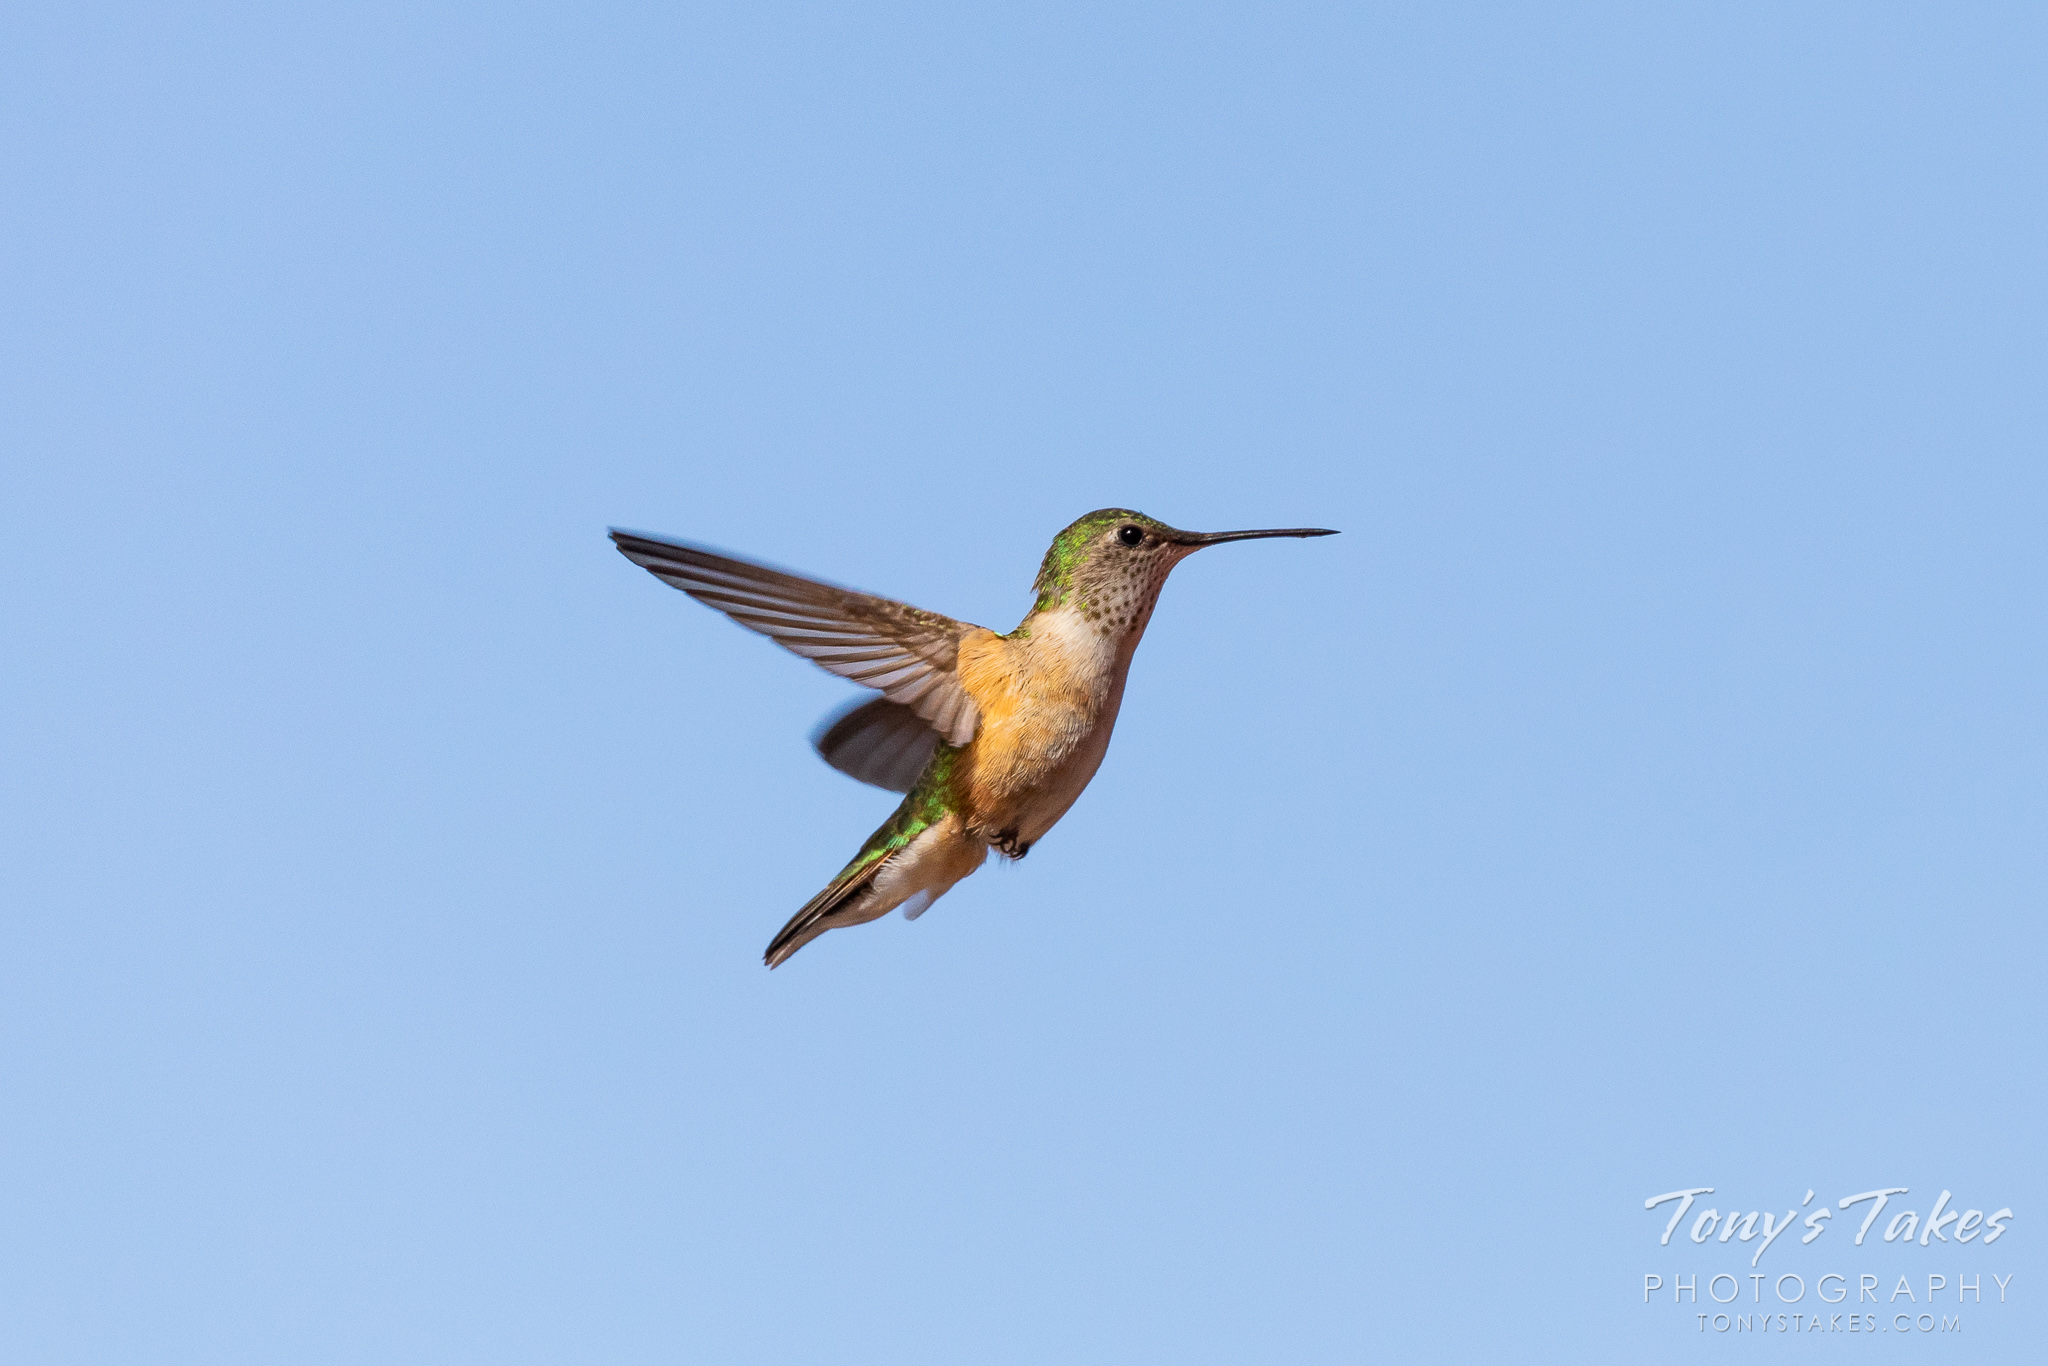 A hummingbird prepares to land at a feeder in the Colorado high country. (© Tony’s Takes)